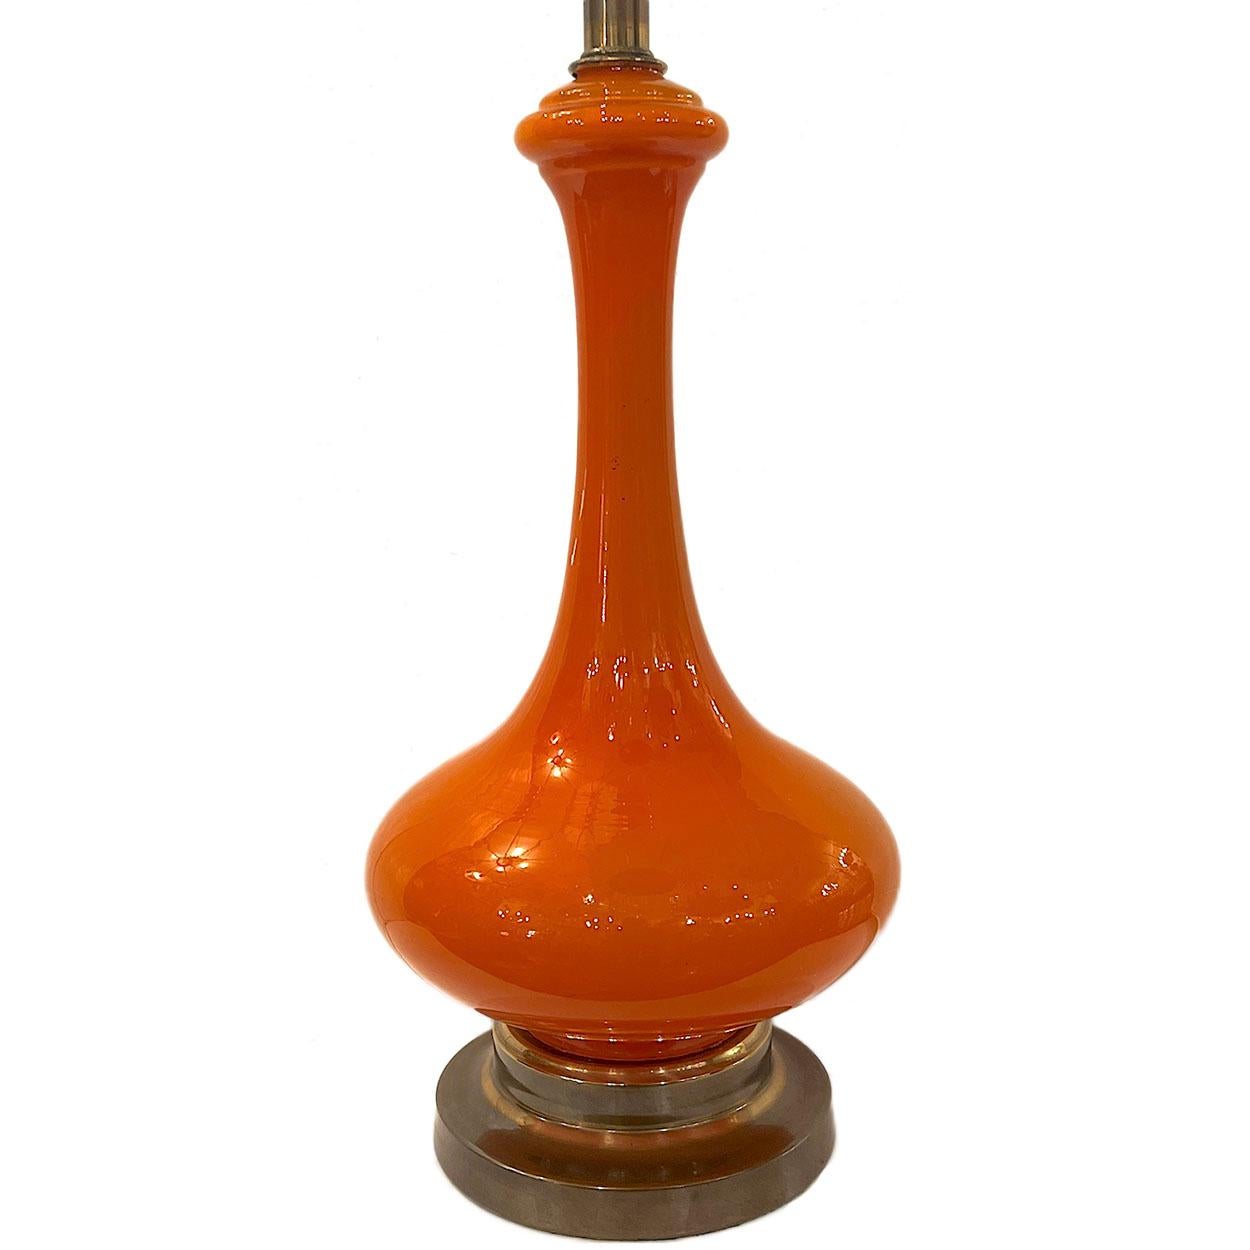 A circa 1960's French molded glass table lamp.

Measurements:
Height of body: 18